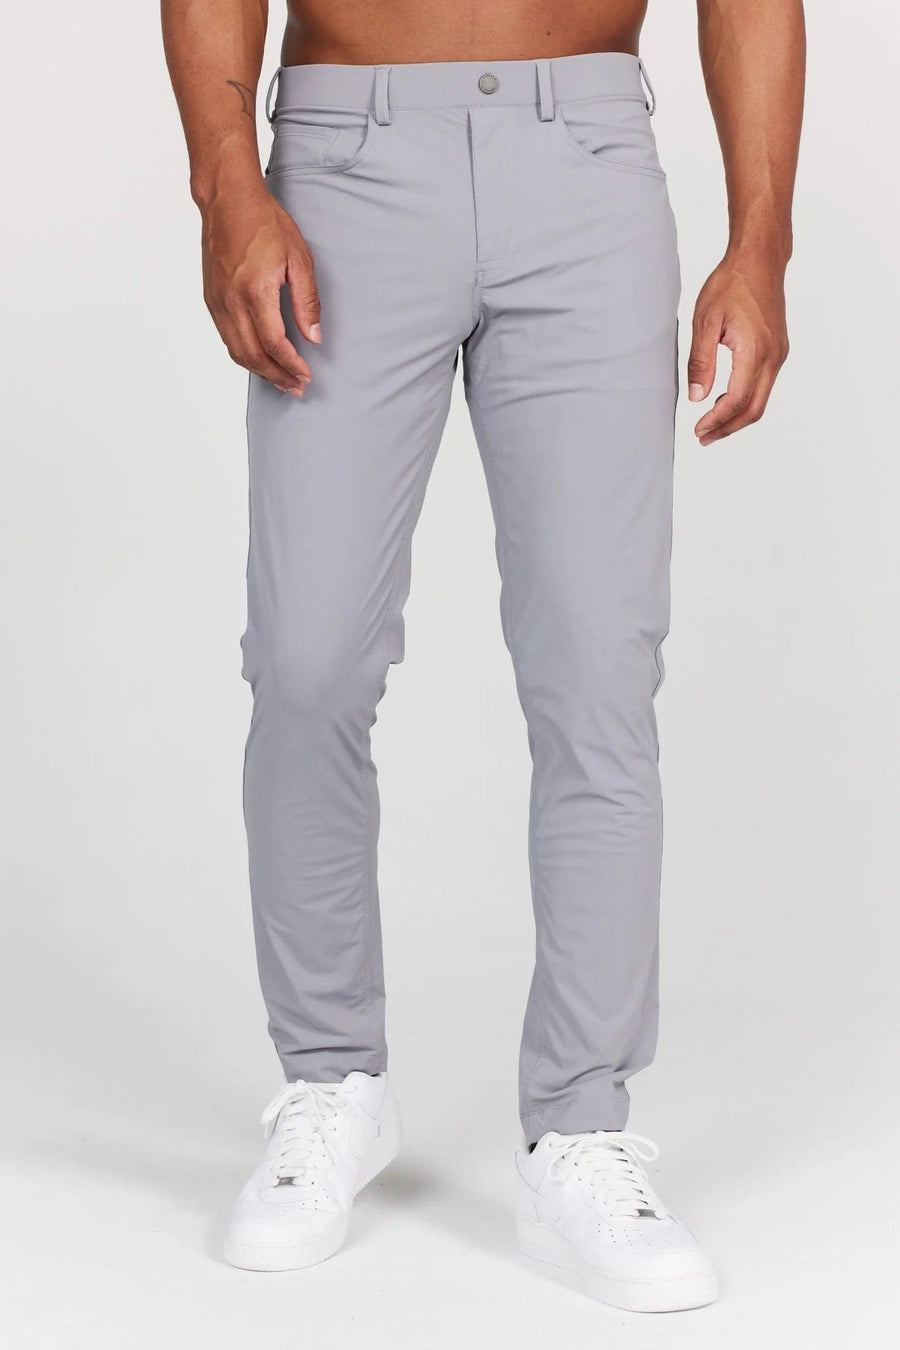 REDVANLY PANTS - FIVE POCKET SHADOW GREY / S KENT PULL-ON TROUSER